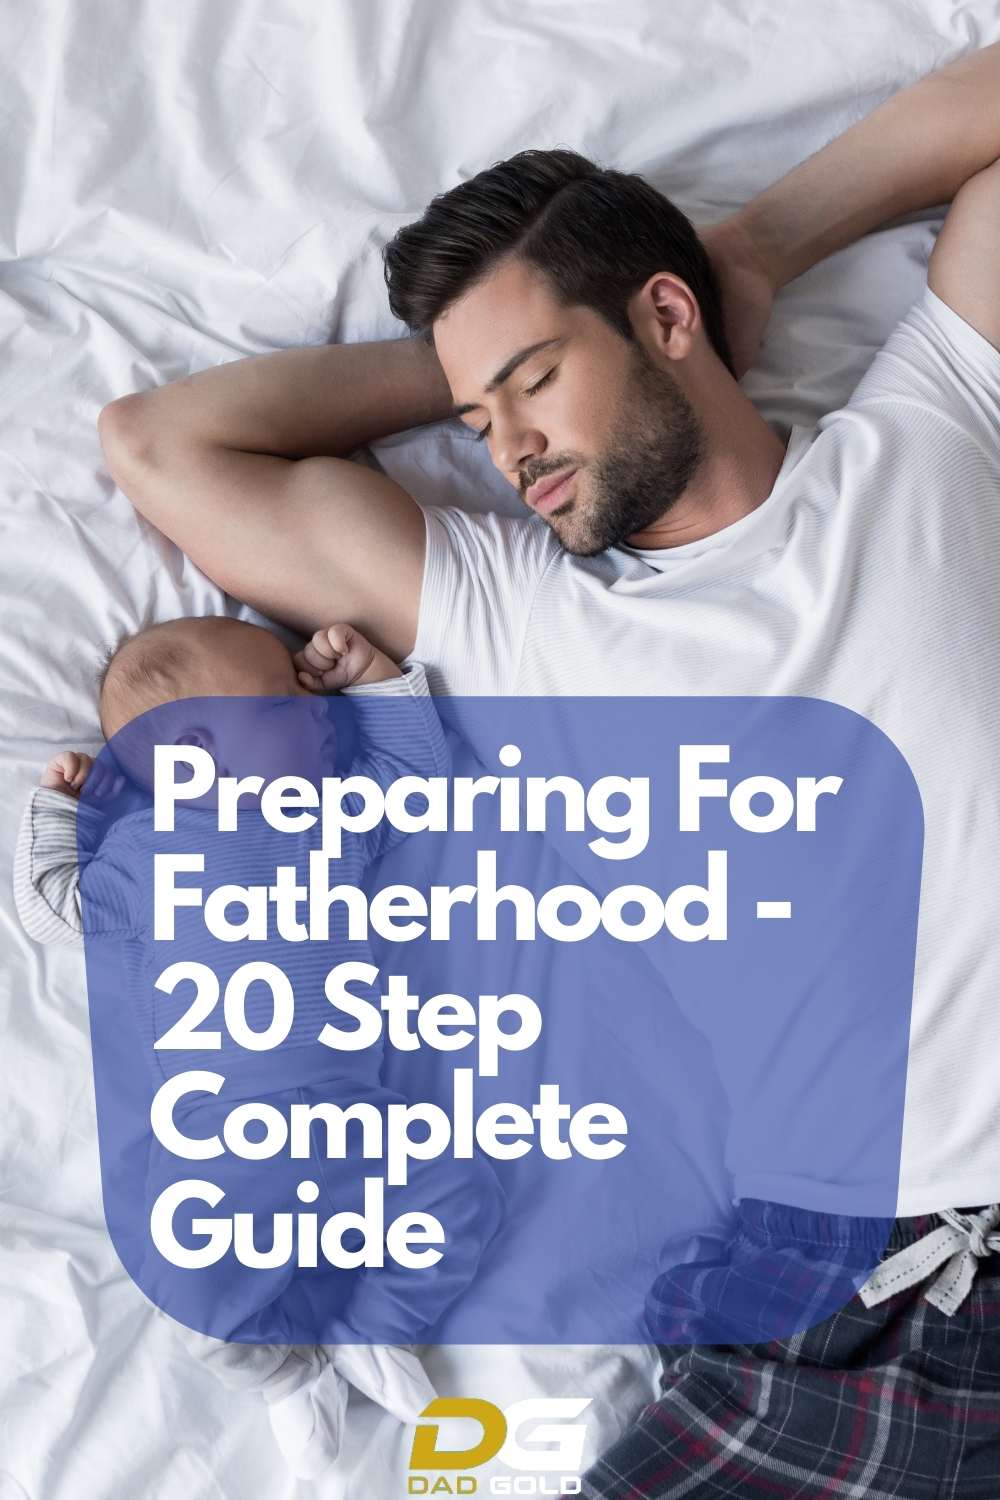 Preparing For Fatherhood - 20 Step Complete Guide